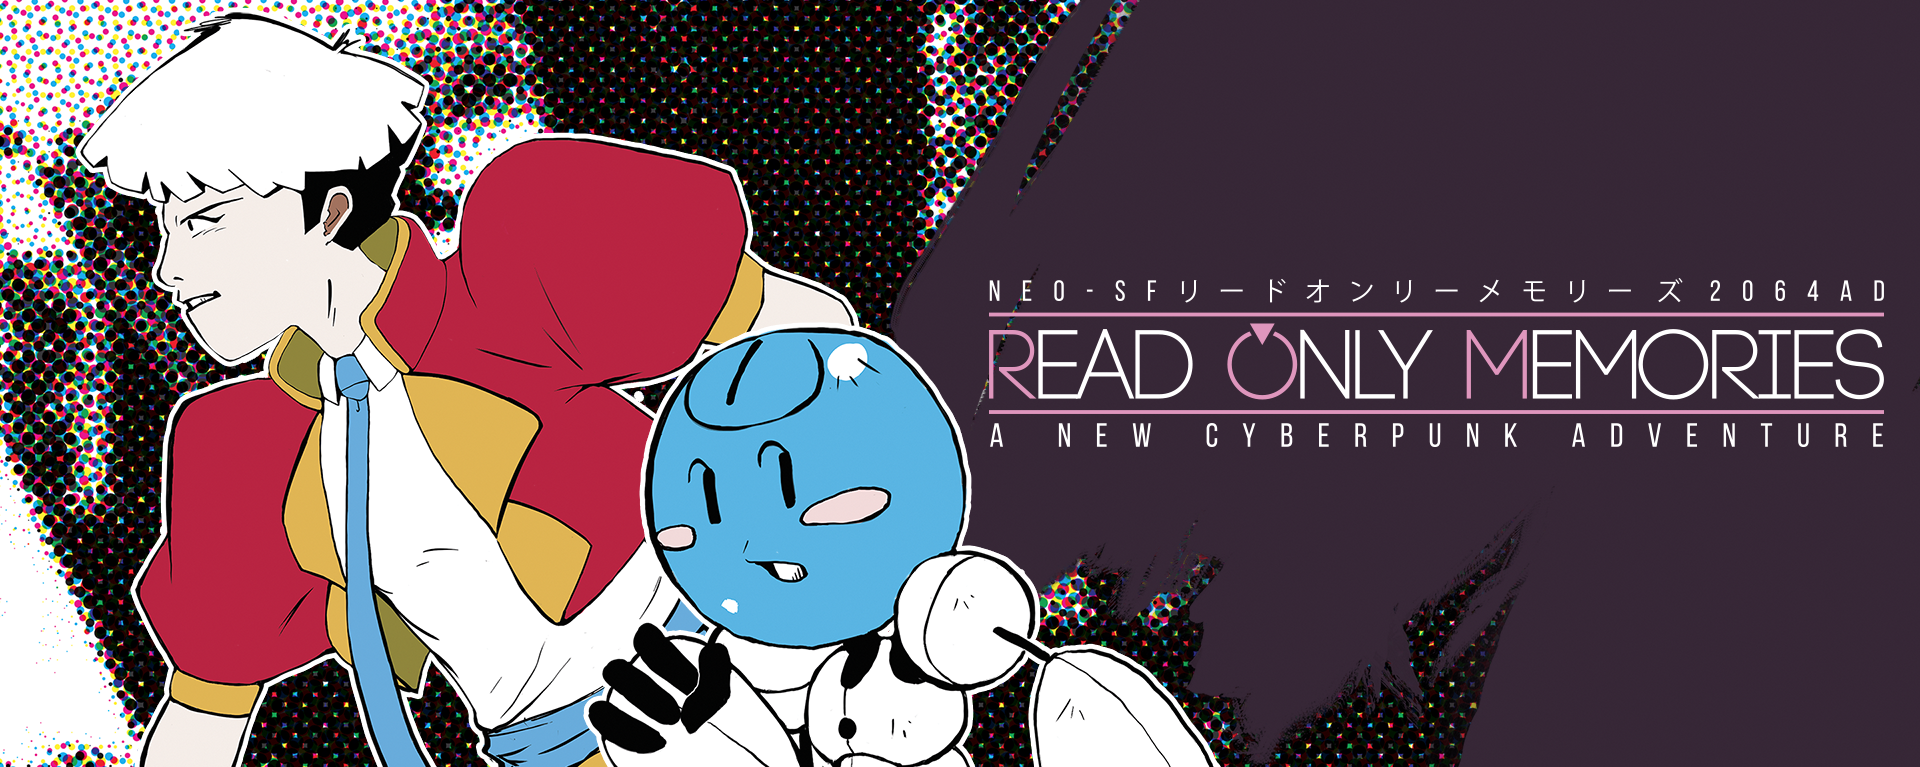 Read Only Memories Re